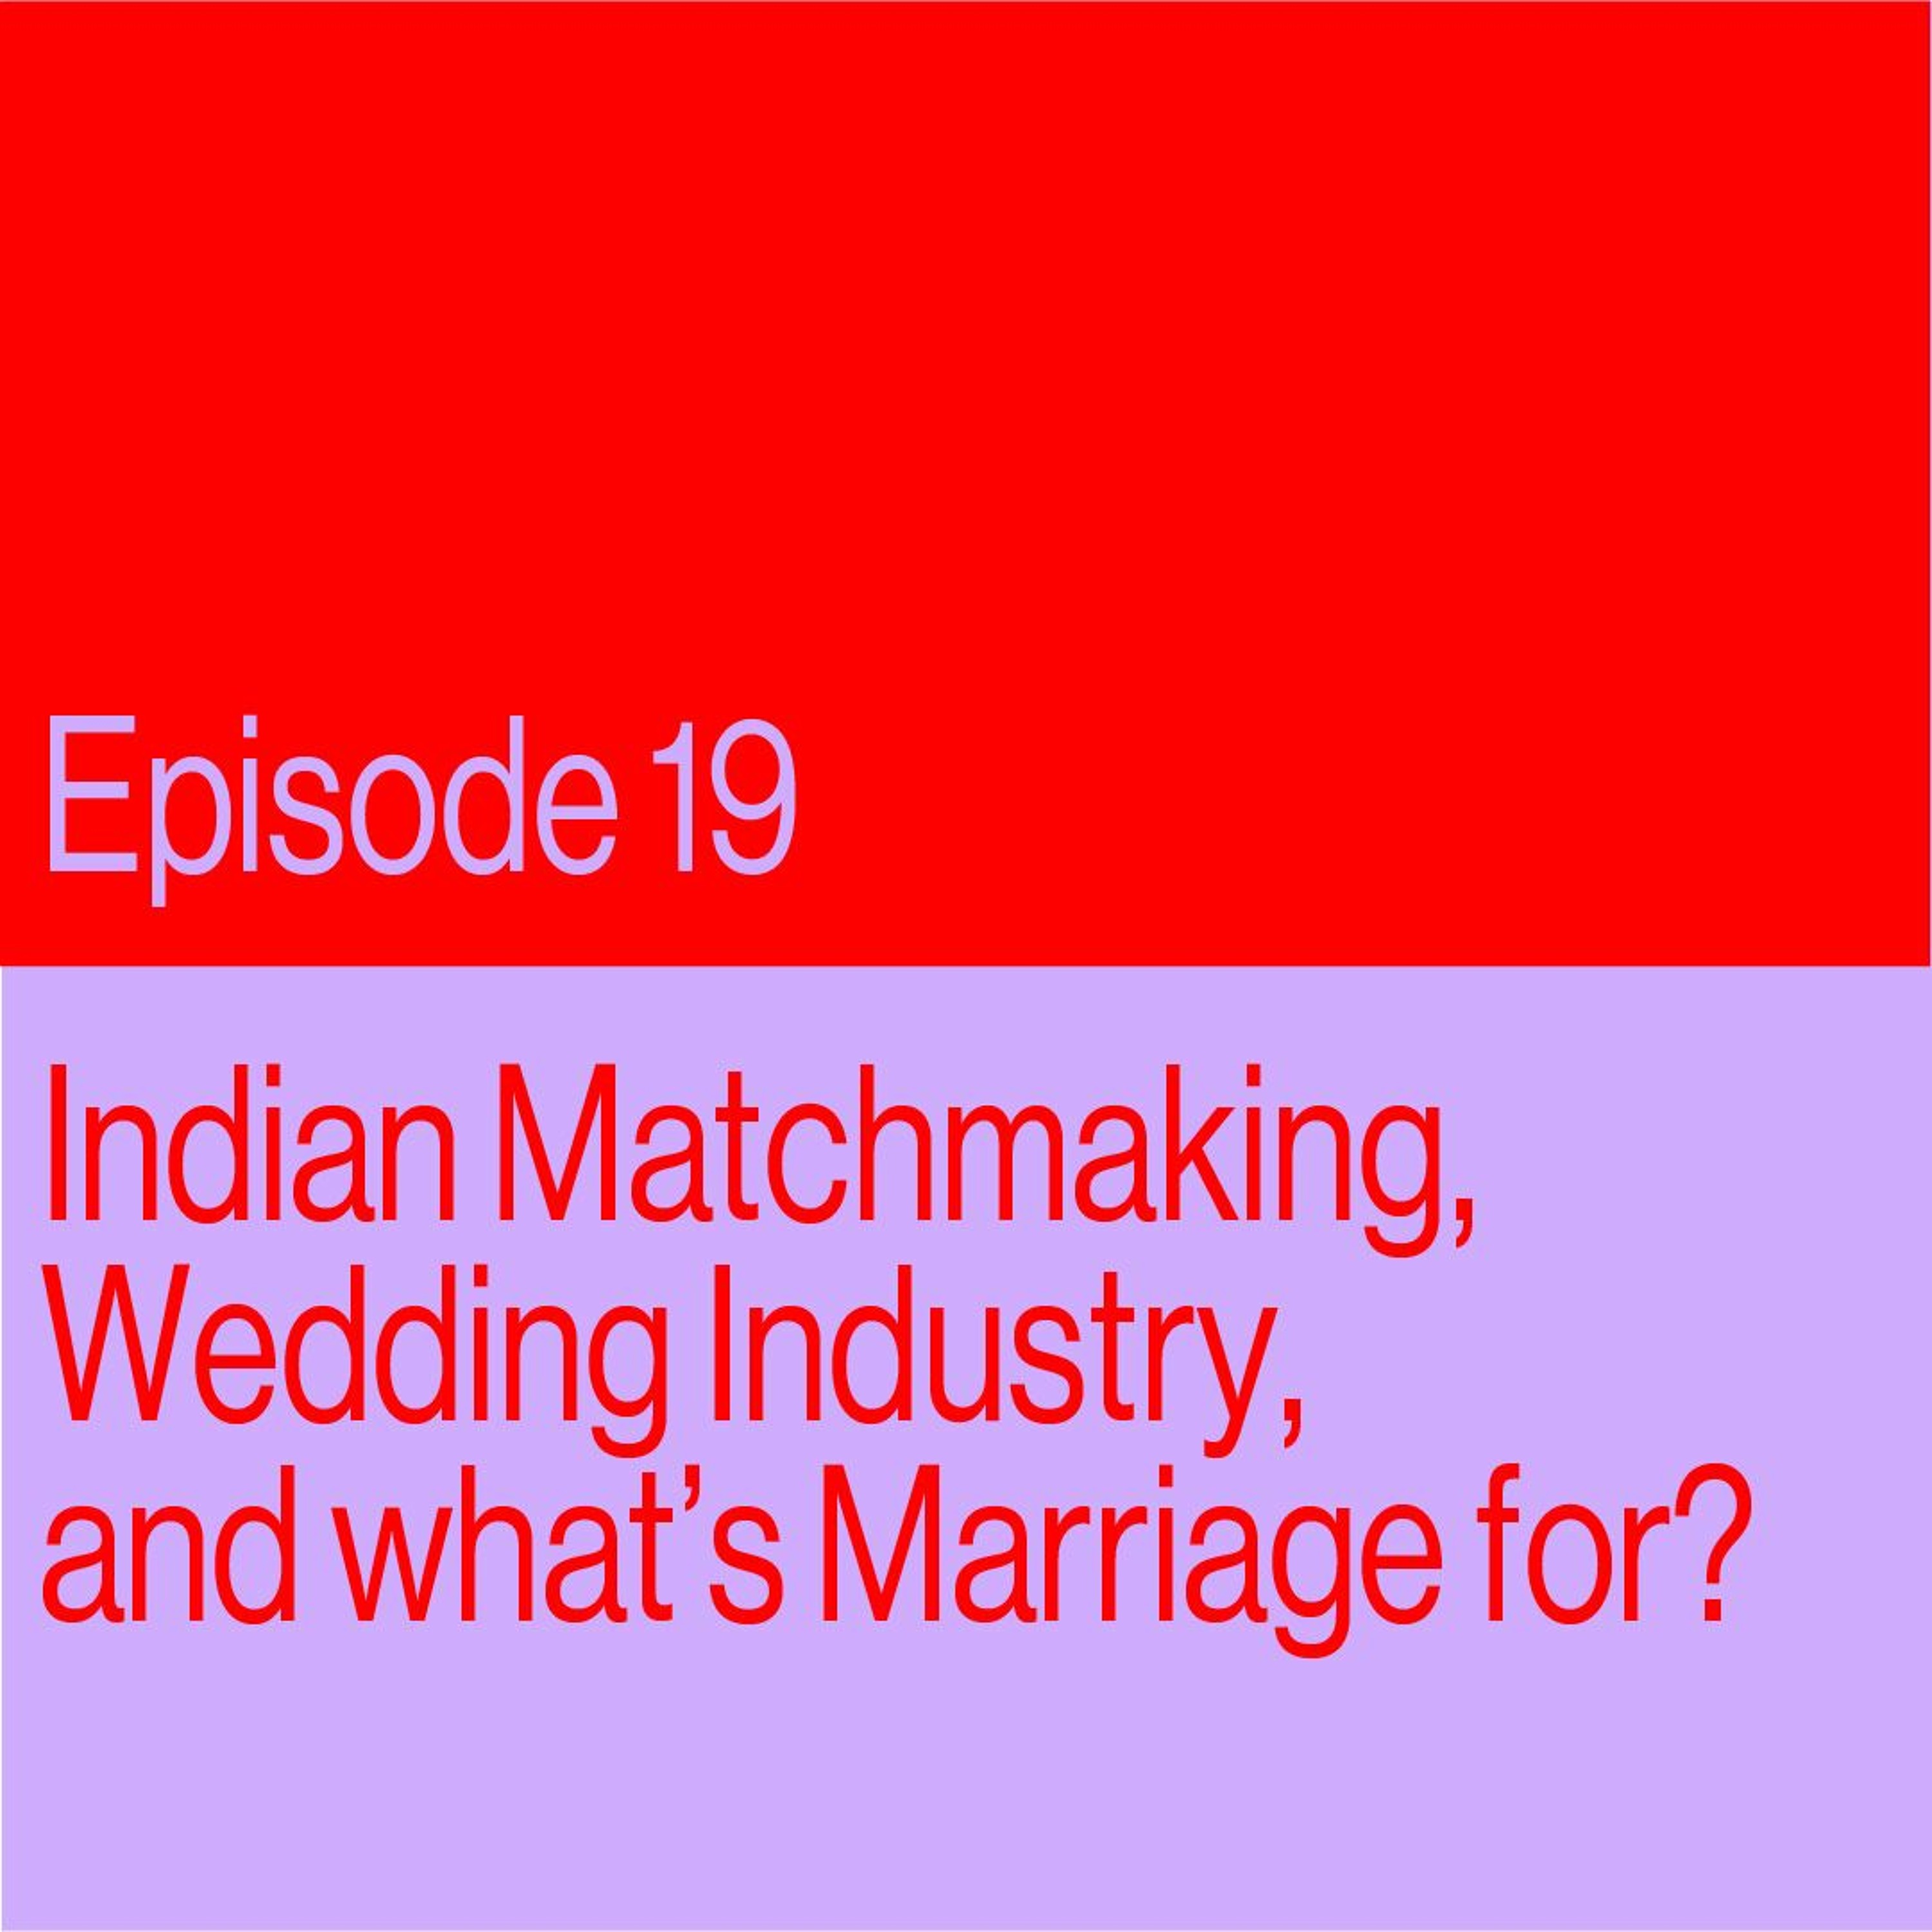 Episode 19: Indian Matchmaking, Wedding Industry, And What Is Marriage For In The 21st Century